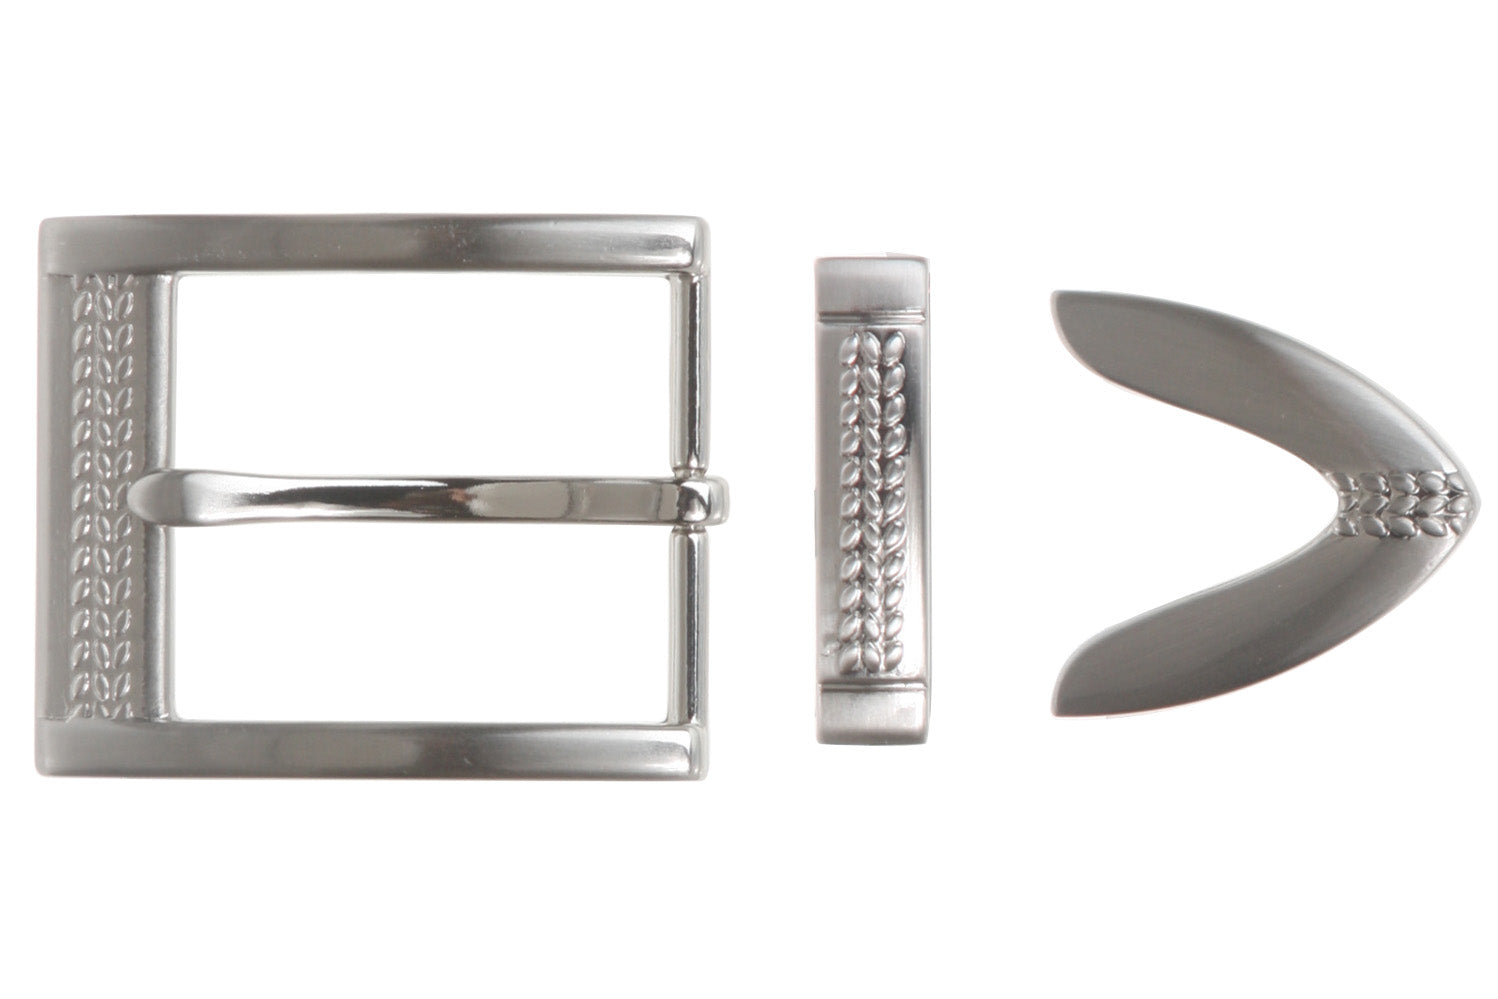 1 1/4" (33 mm) Nickel Free Single Prong Rectangular Golf Belt Buckle Set with Keeper and Tip